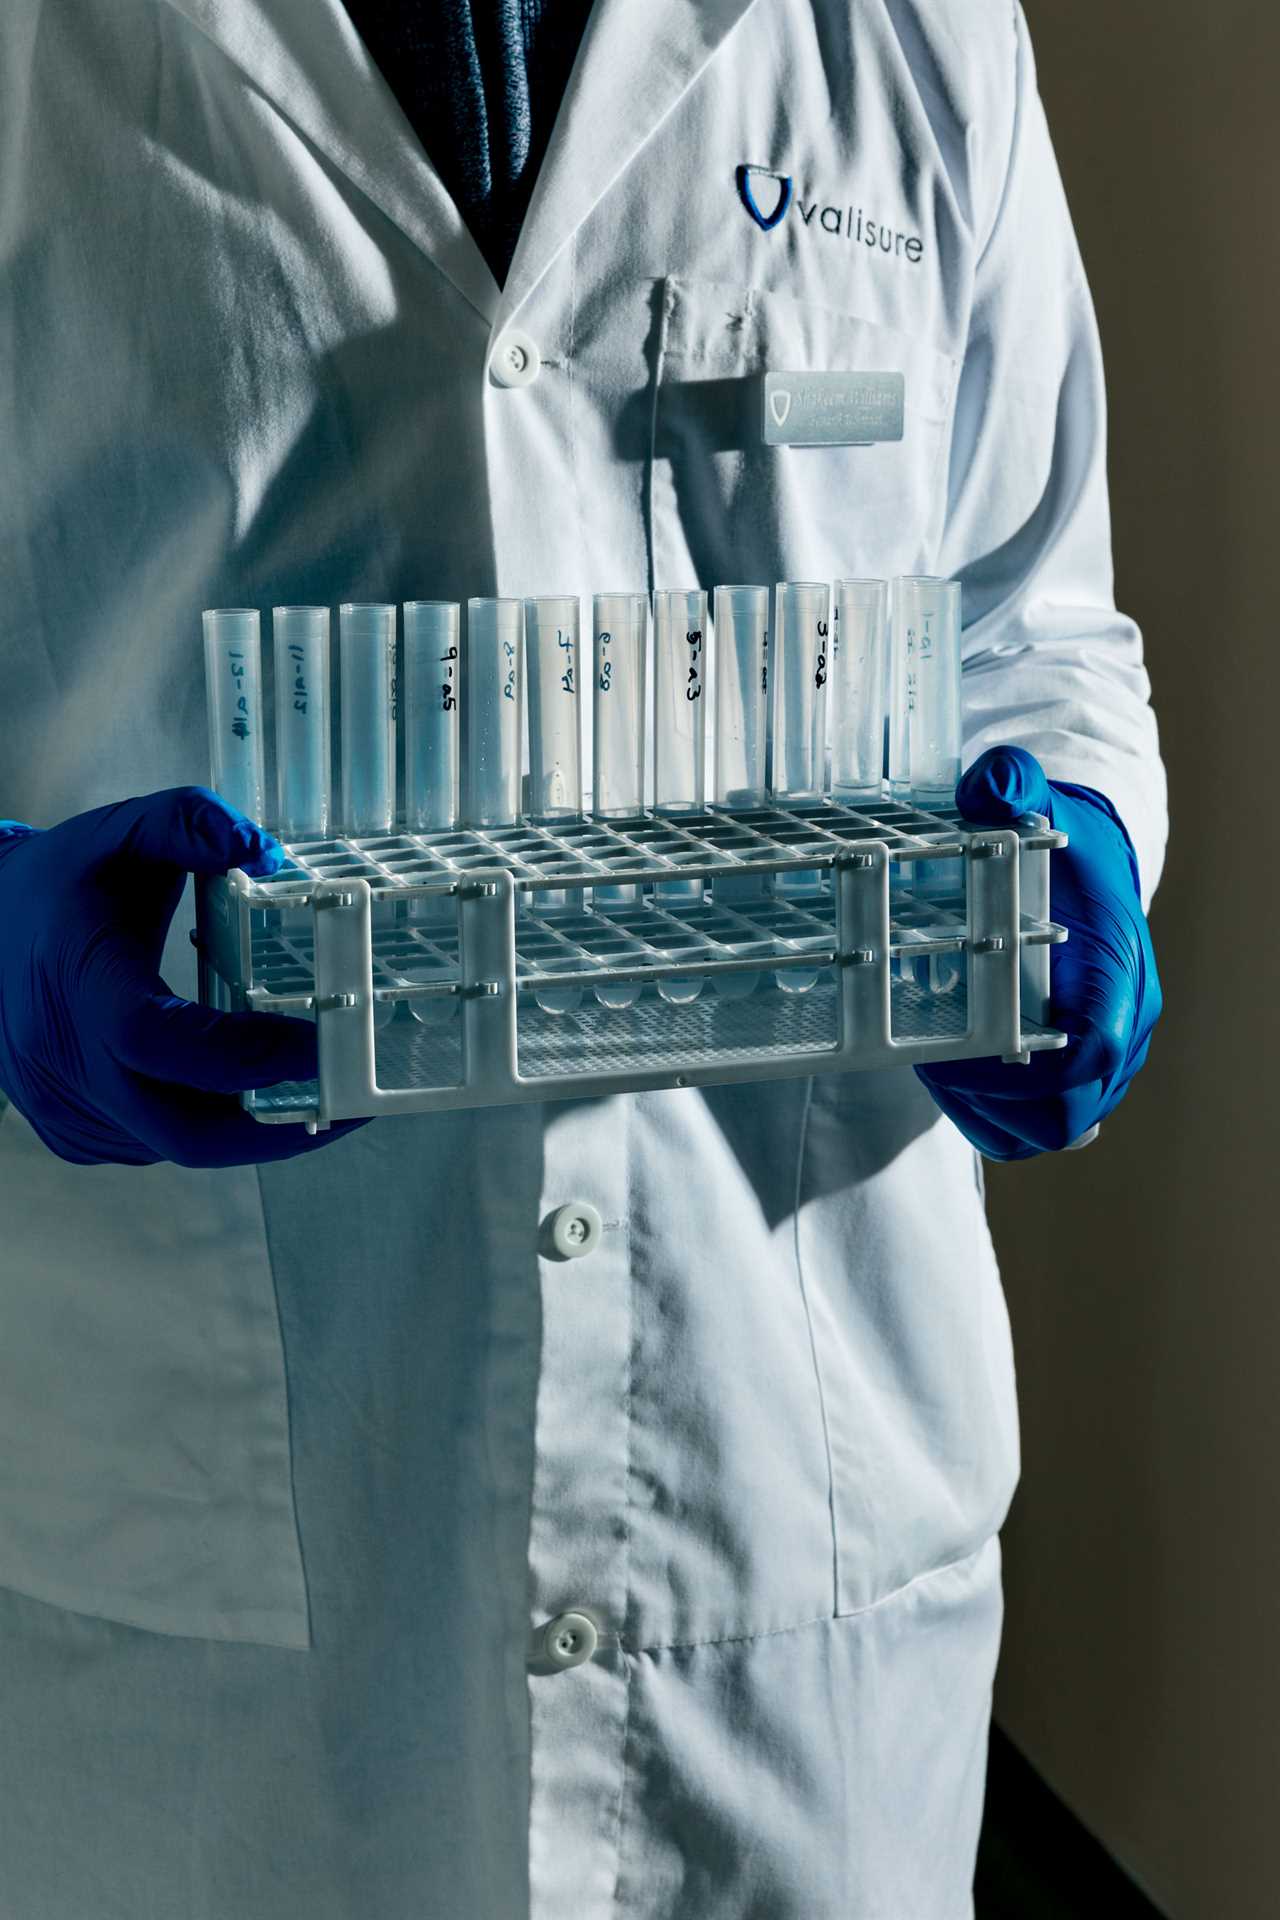 A Valisure employee carries lab samples.